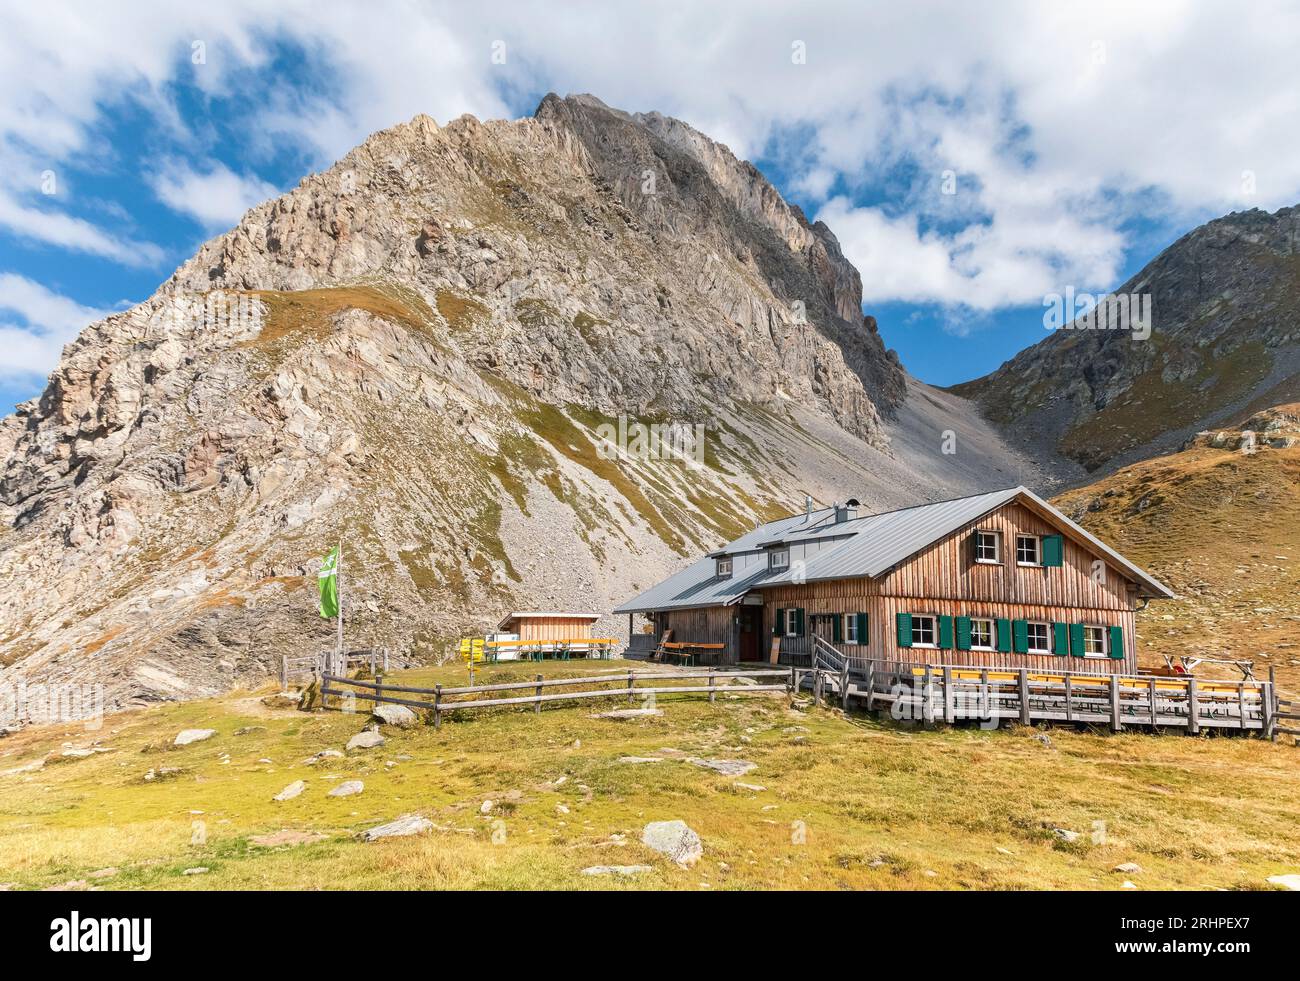 Austria, East Tyrol, district of Lienz, Kartitsch. The alpine hut Obstansersee Hütte in the Carnic Alps Stock Photo